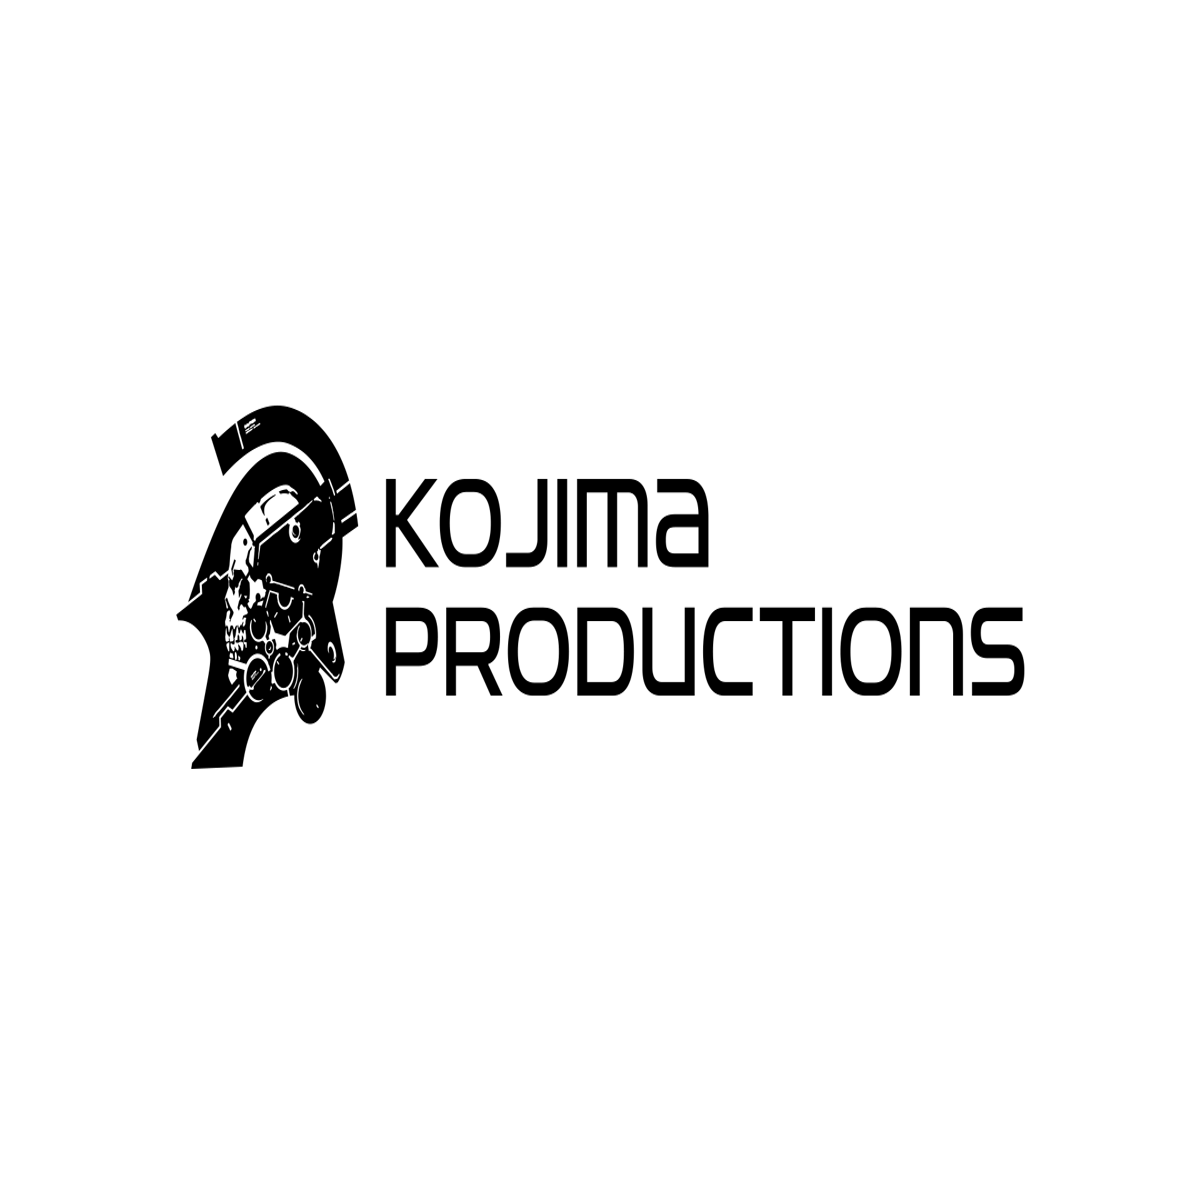 New game 'OD' announced by Kojima Productions and Xbox Game